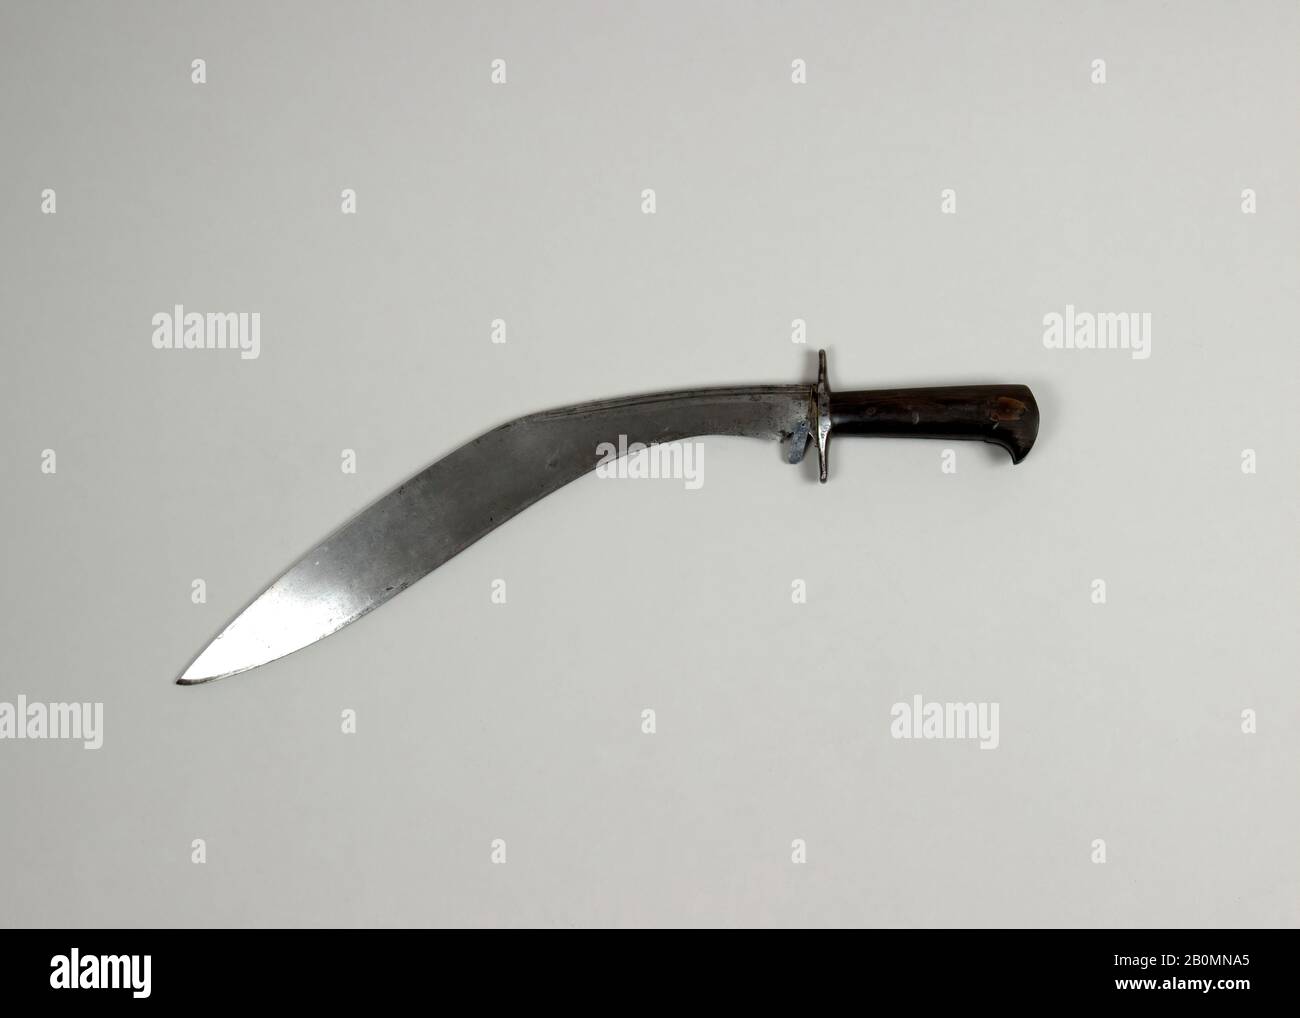 Knife (Kukri), Indian or Nepalese, Gurkha, 19th century, Indian or Nepalese, Gurkha, Steel, wood, L. 18 in. (45.7 cm); W. 2 3/4 in. (7 cm); Wt. 1 lb. 5.7 oz. (615.2 g), Knives Stock Photo